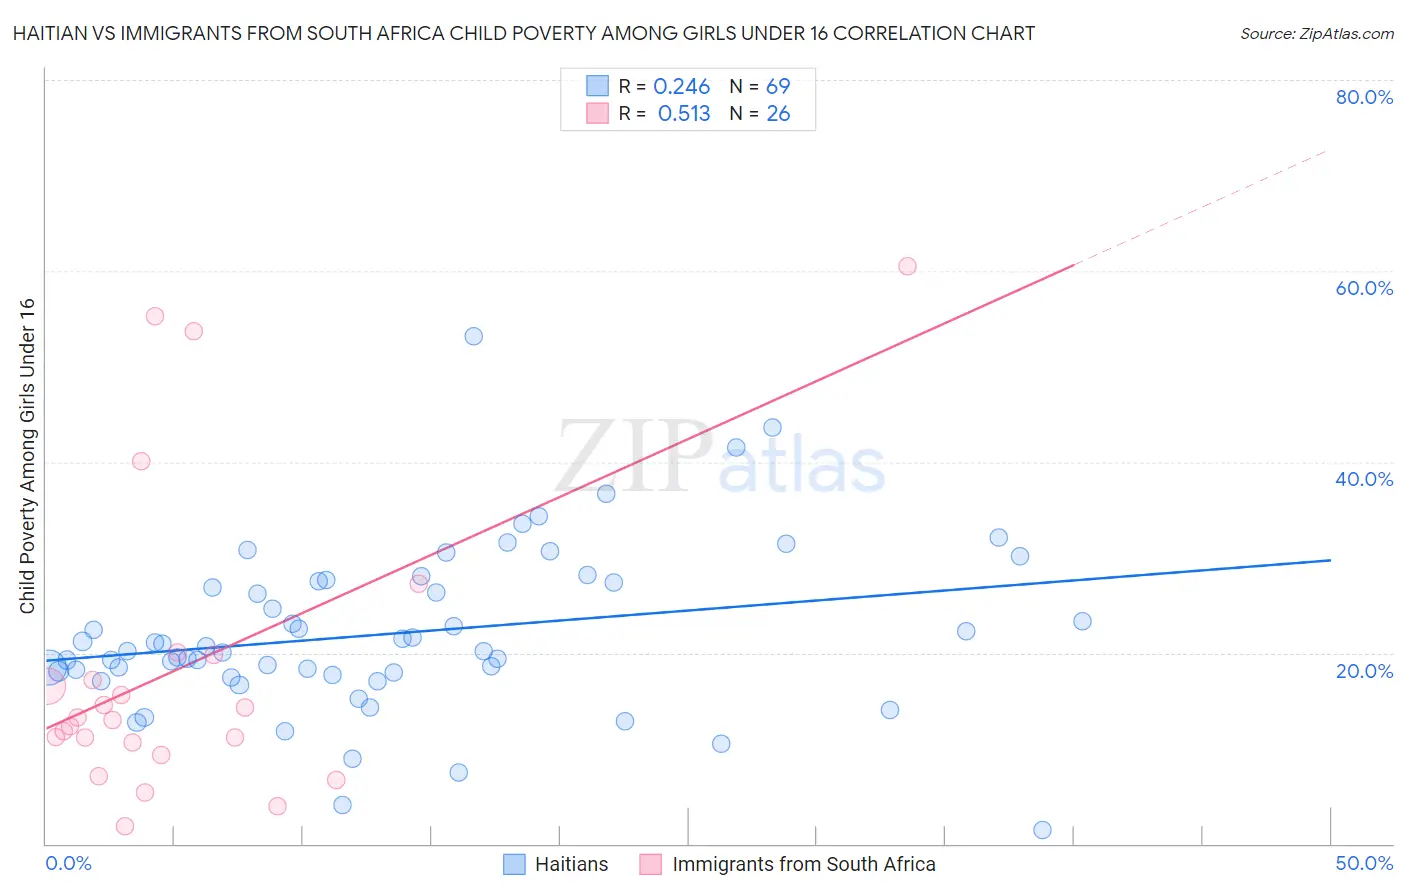 Haitian vs Immigrants from South Africa Child Poverty Among Girls Under 16